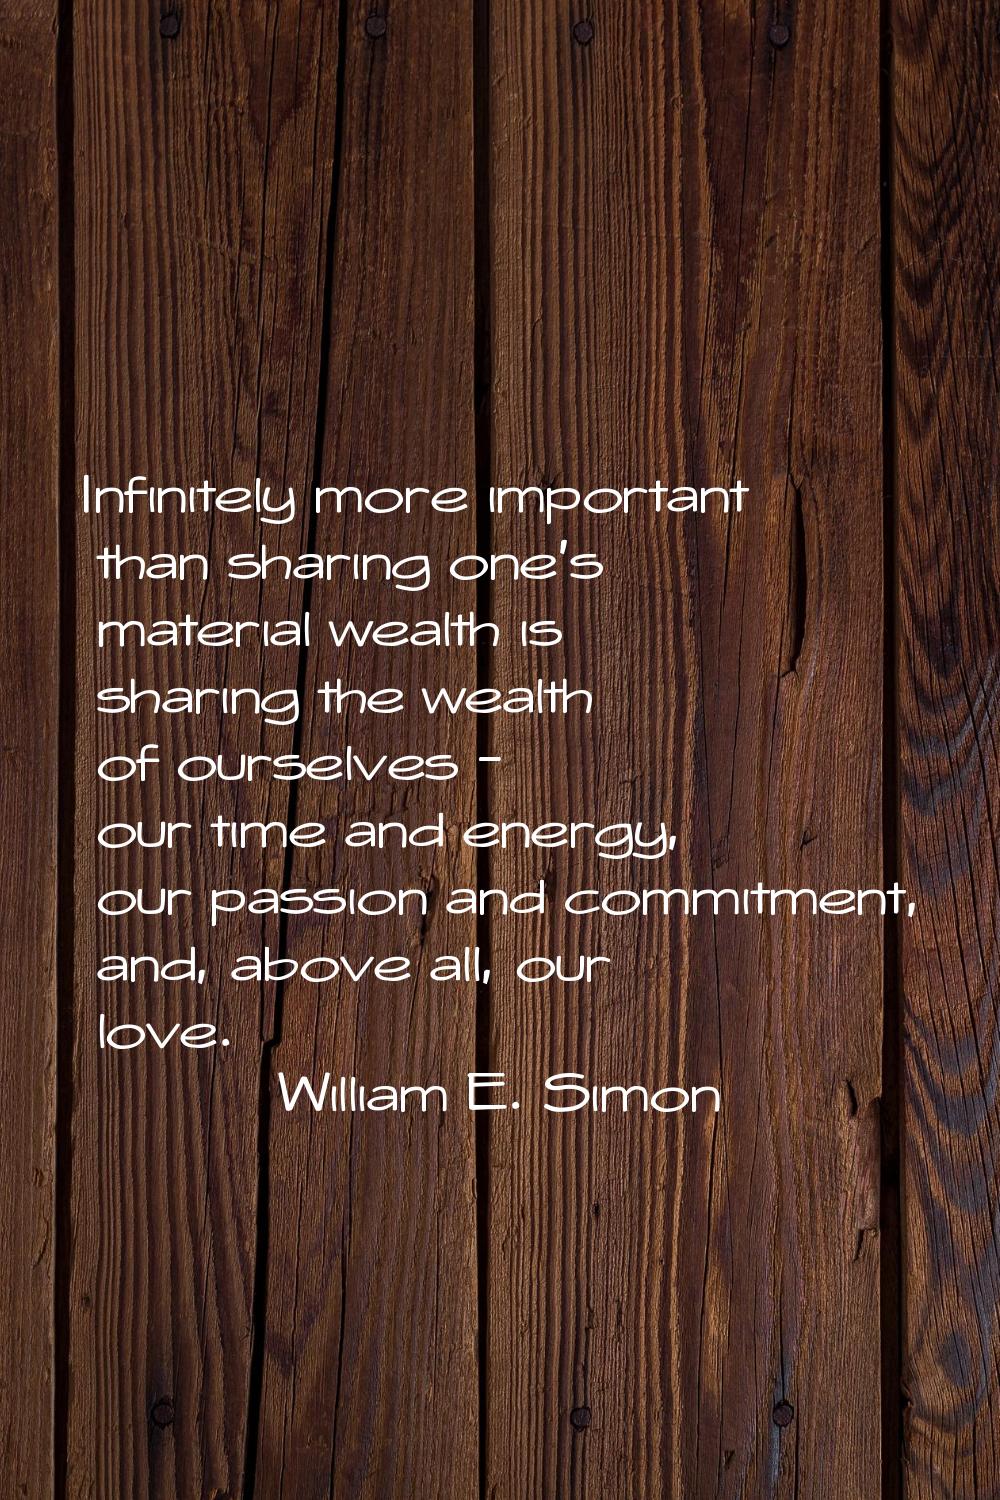 Infinitely more important than sharing one's material wealth is sharing the wealth of ourselves - o